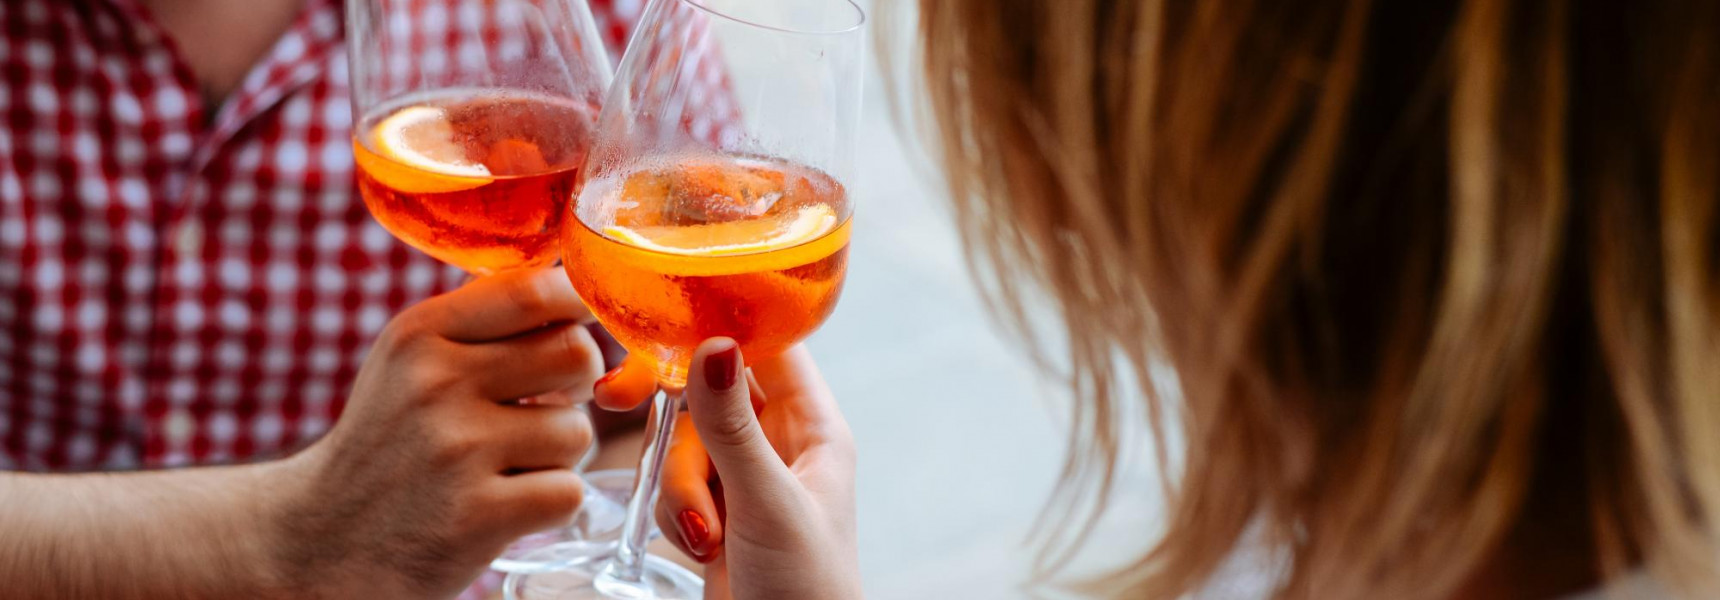 Top 5 Alternative Drink Experiences in Florence